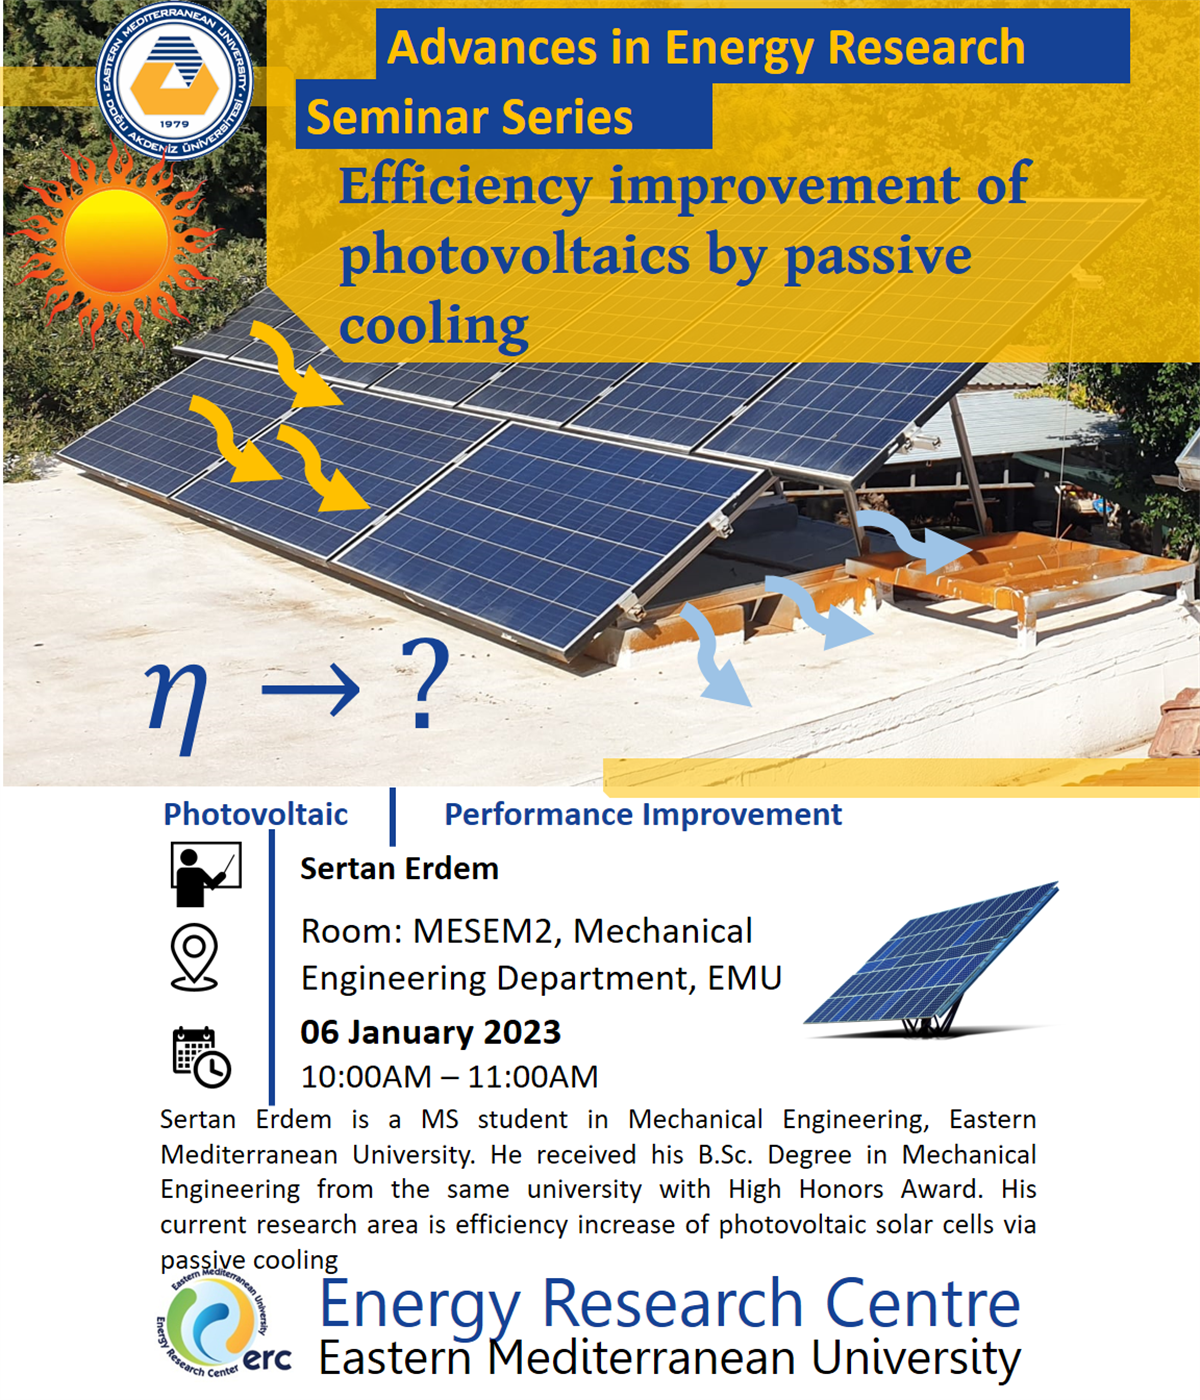 Advances in Energy Research Seminar Series "Efficiency improvement of photovoltaics by passive cooling"